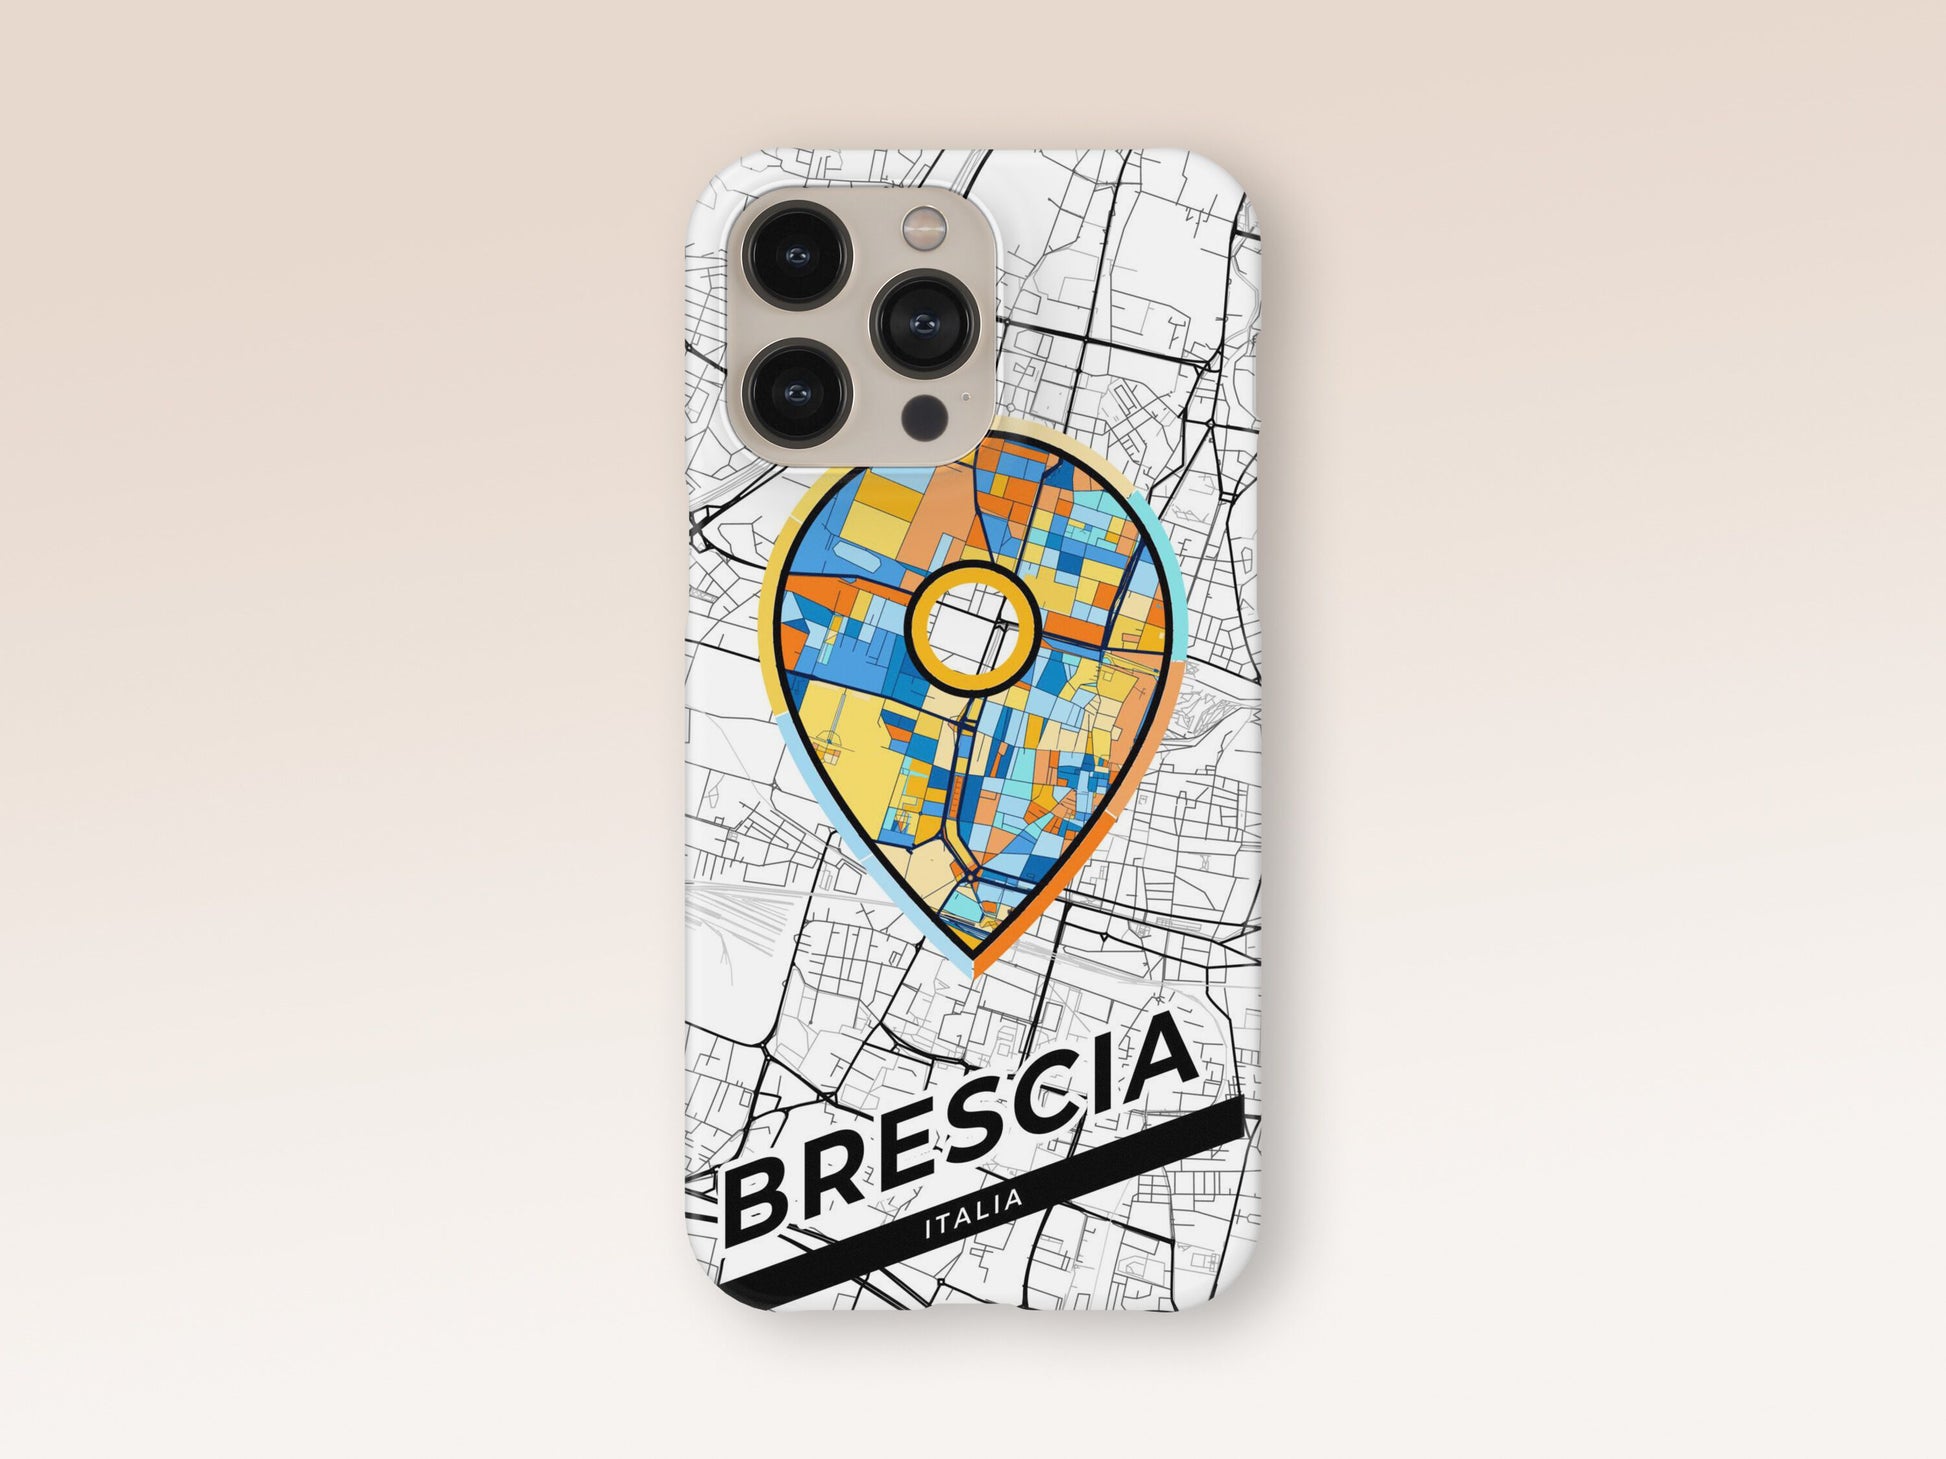 Brescia Italy slim phone case with colorful icon. Birthday, wedding or housewarming gift. Couple match cases. 1